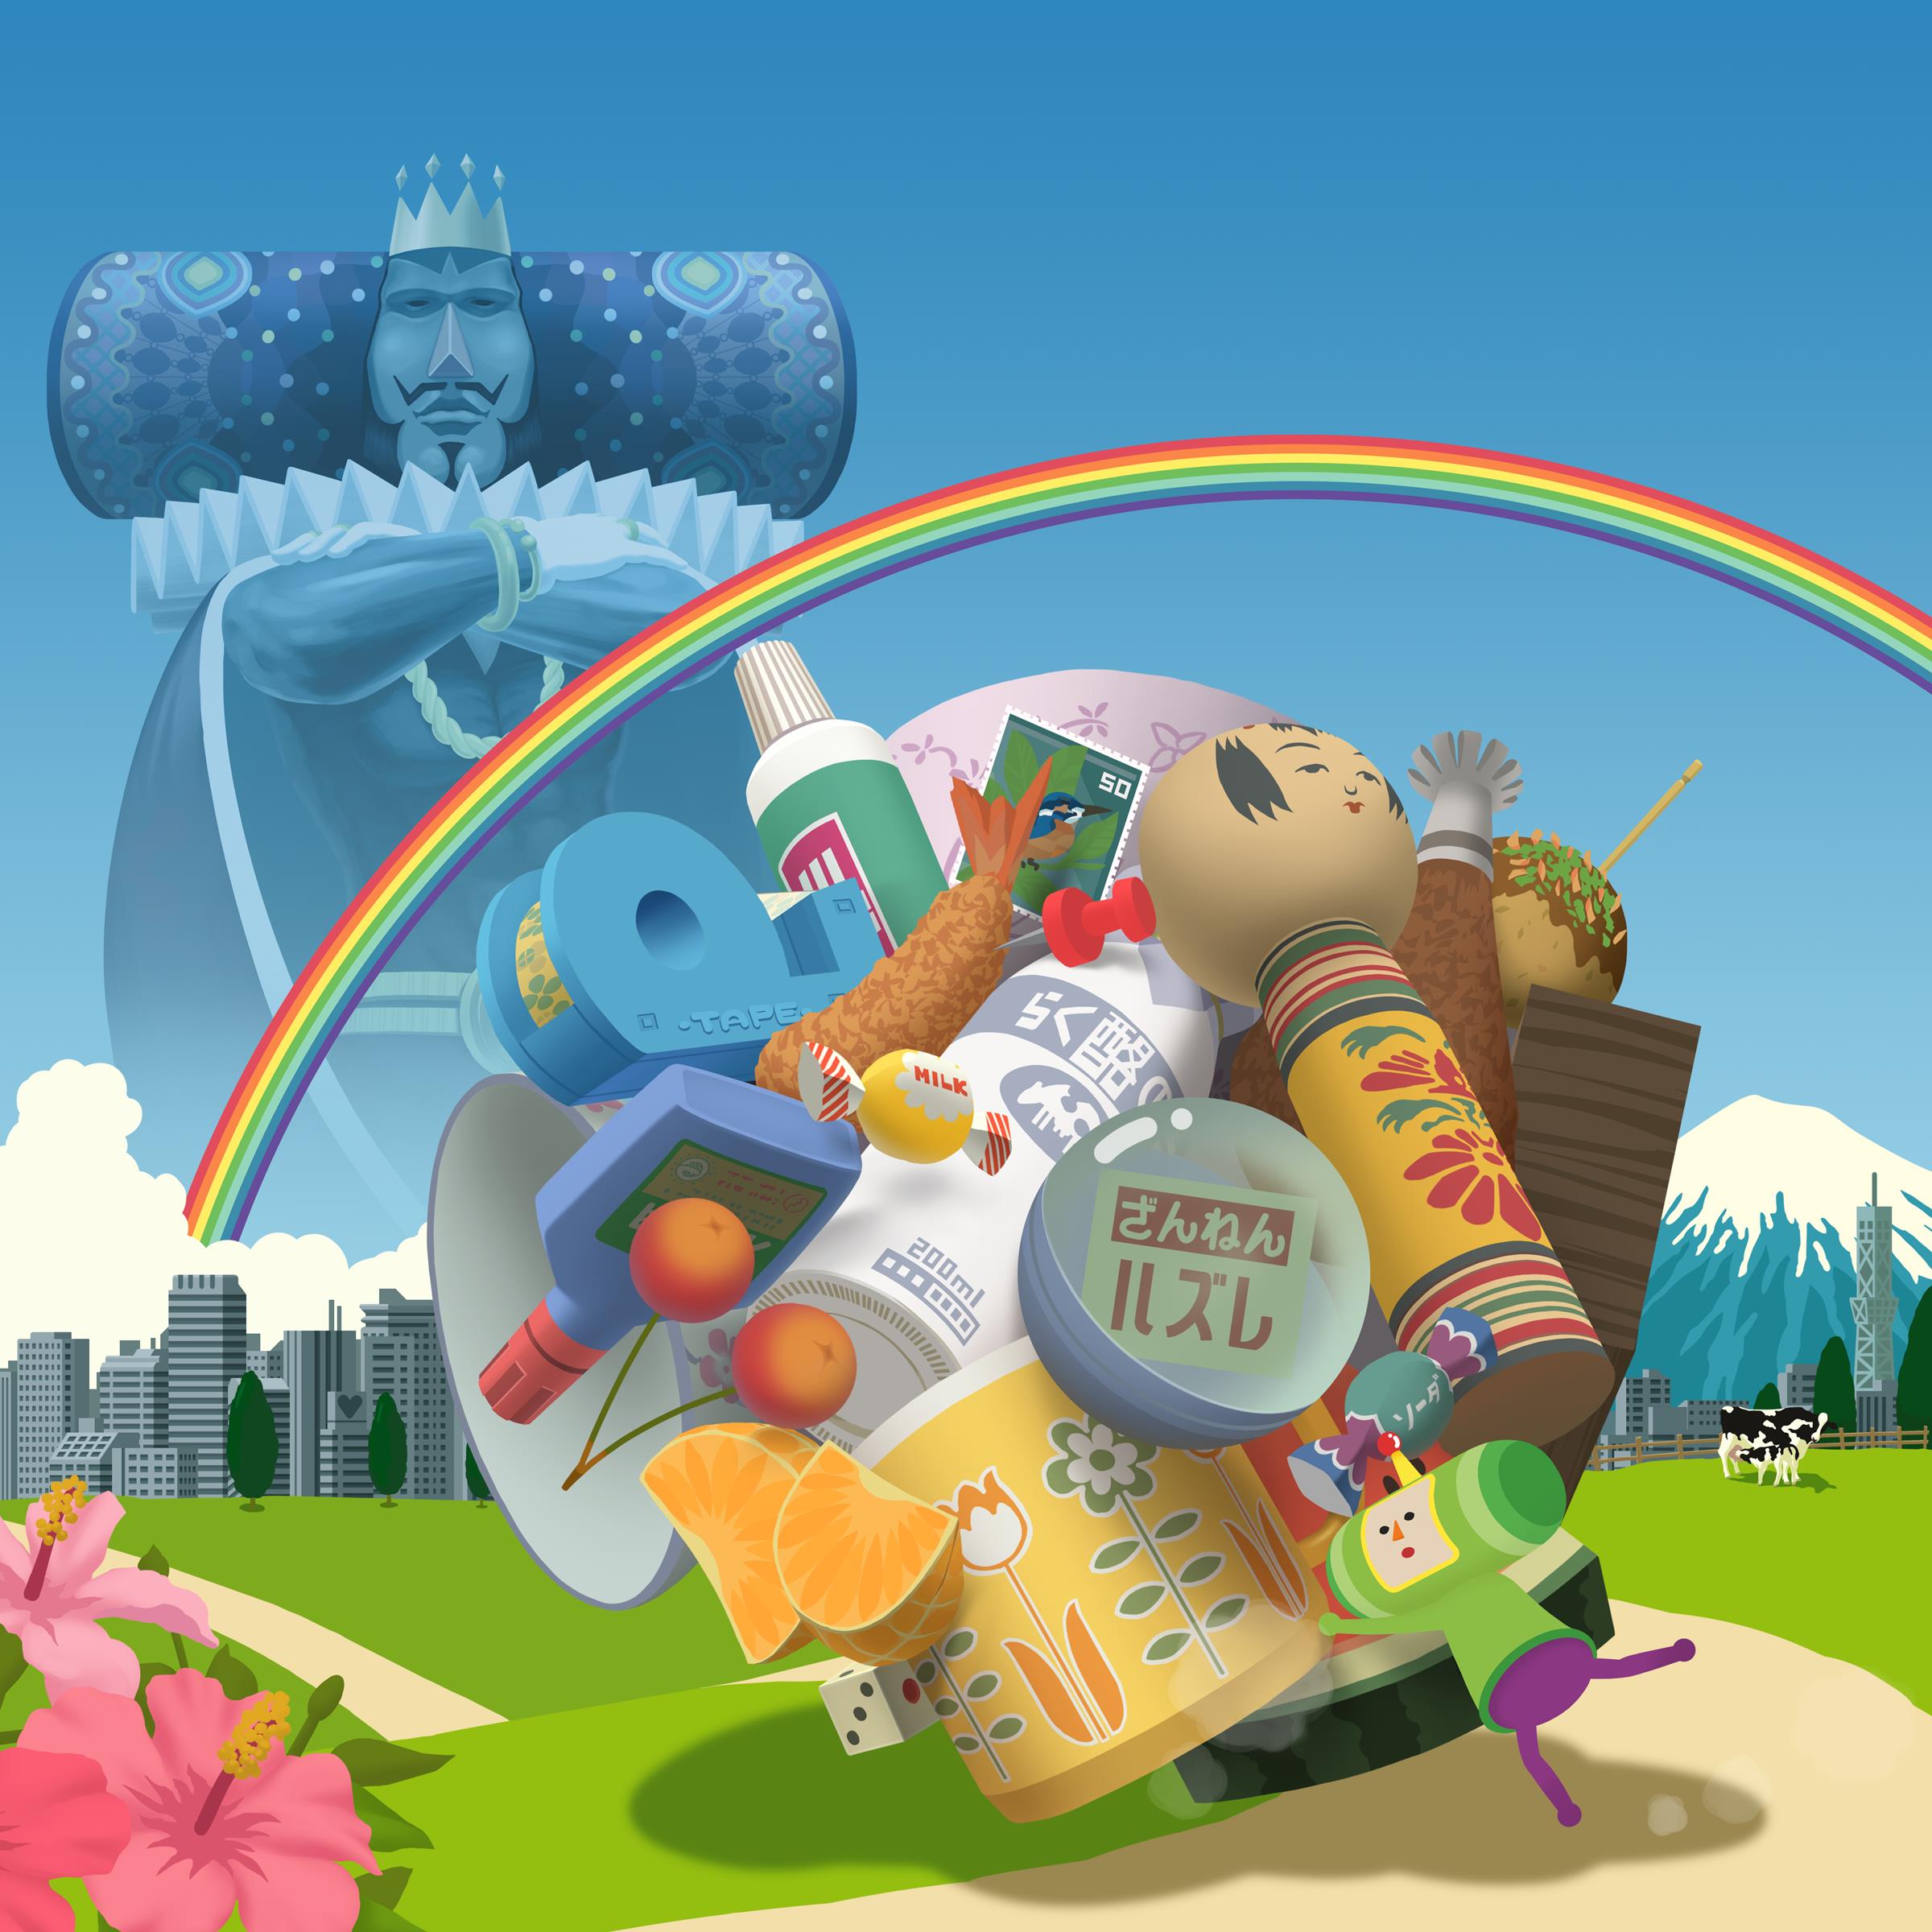 Image for Wattam, the next game from the maker of Katamari Damacy, hits next month